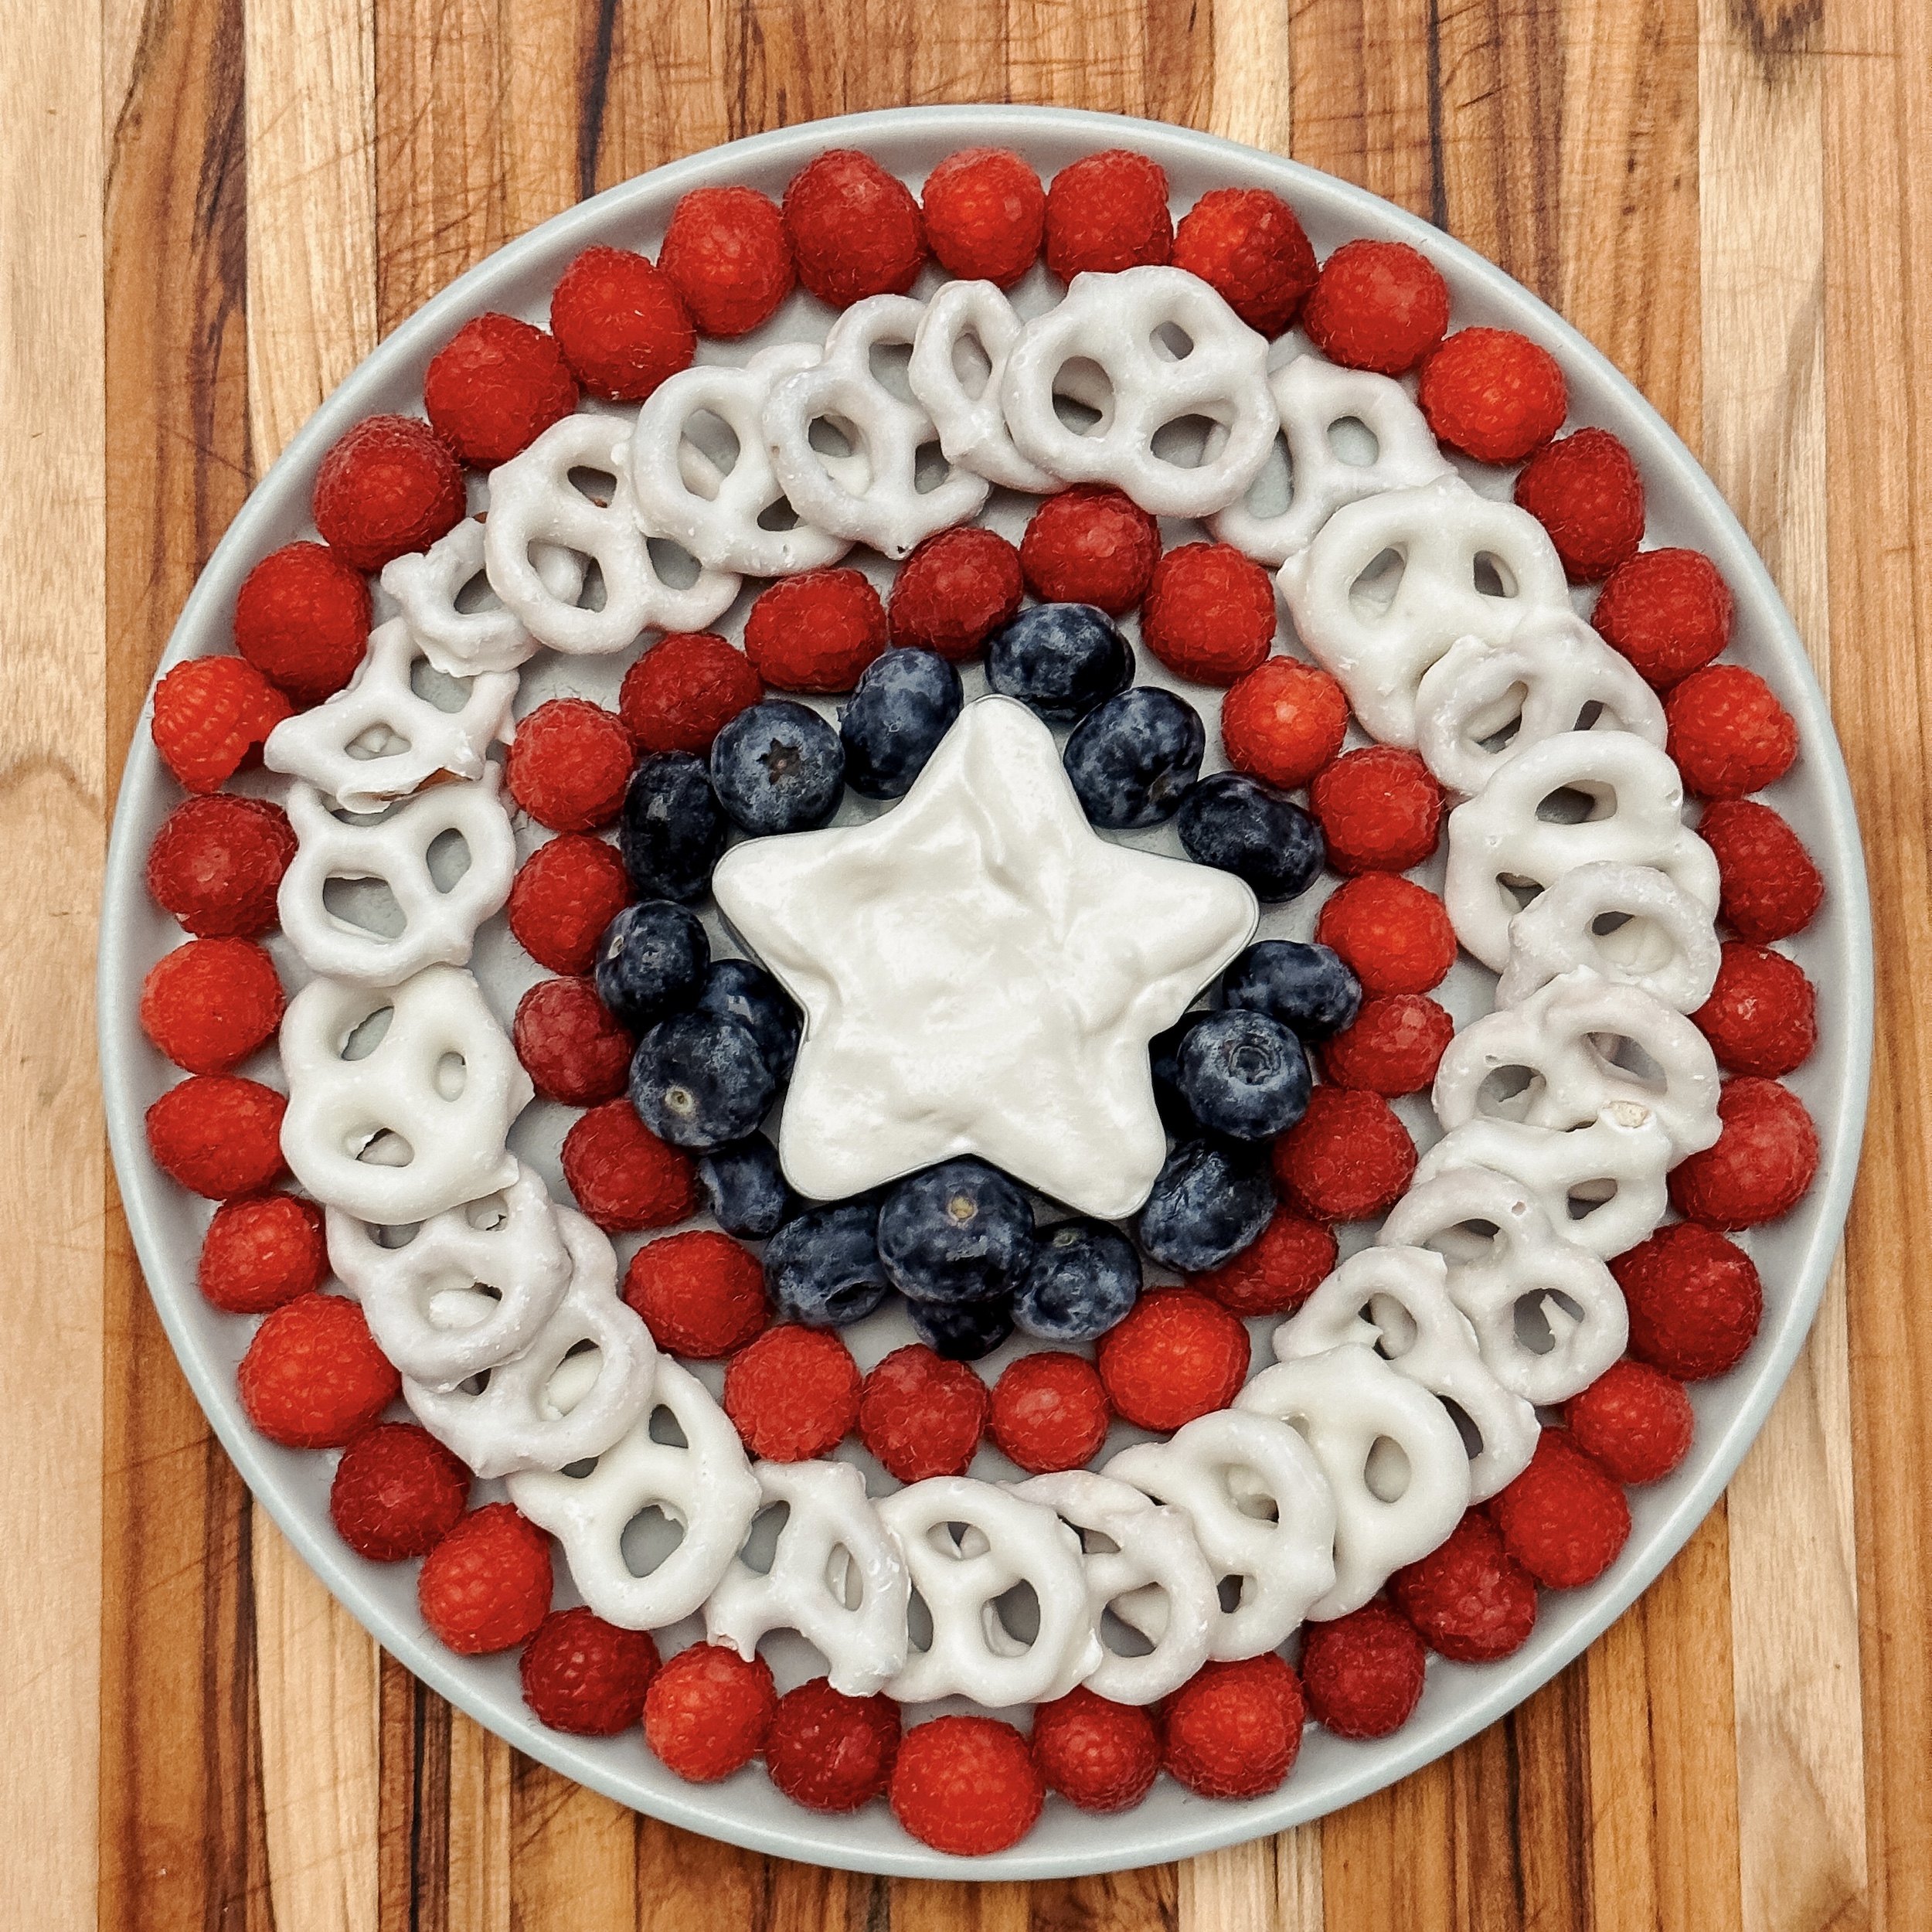 Captain America's Fruit Platter (round plate with raspberries, blueberries, and yogurt covered pretzels arranged like Captain America's shield)